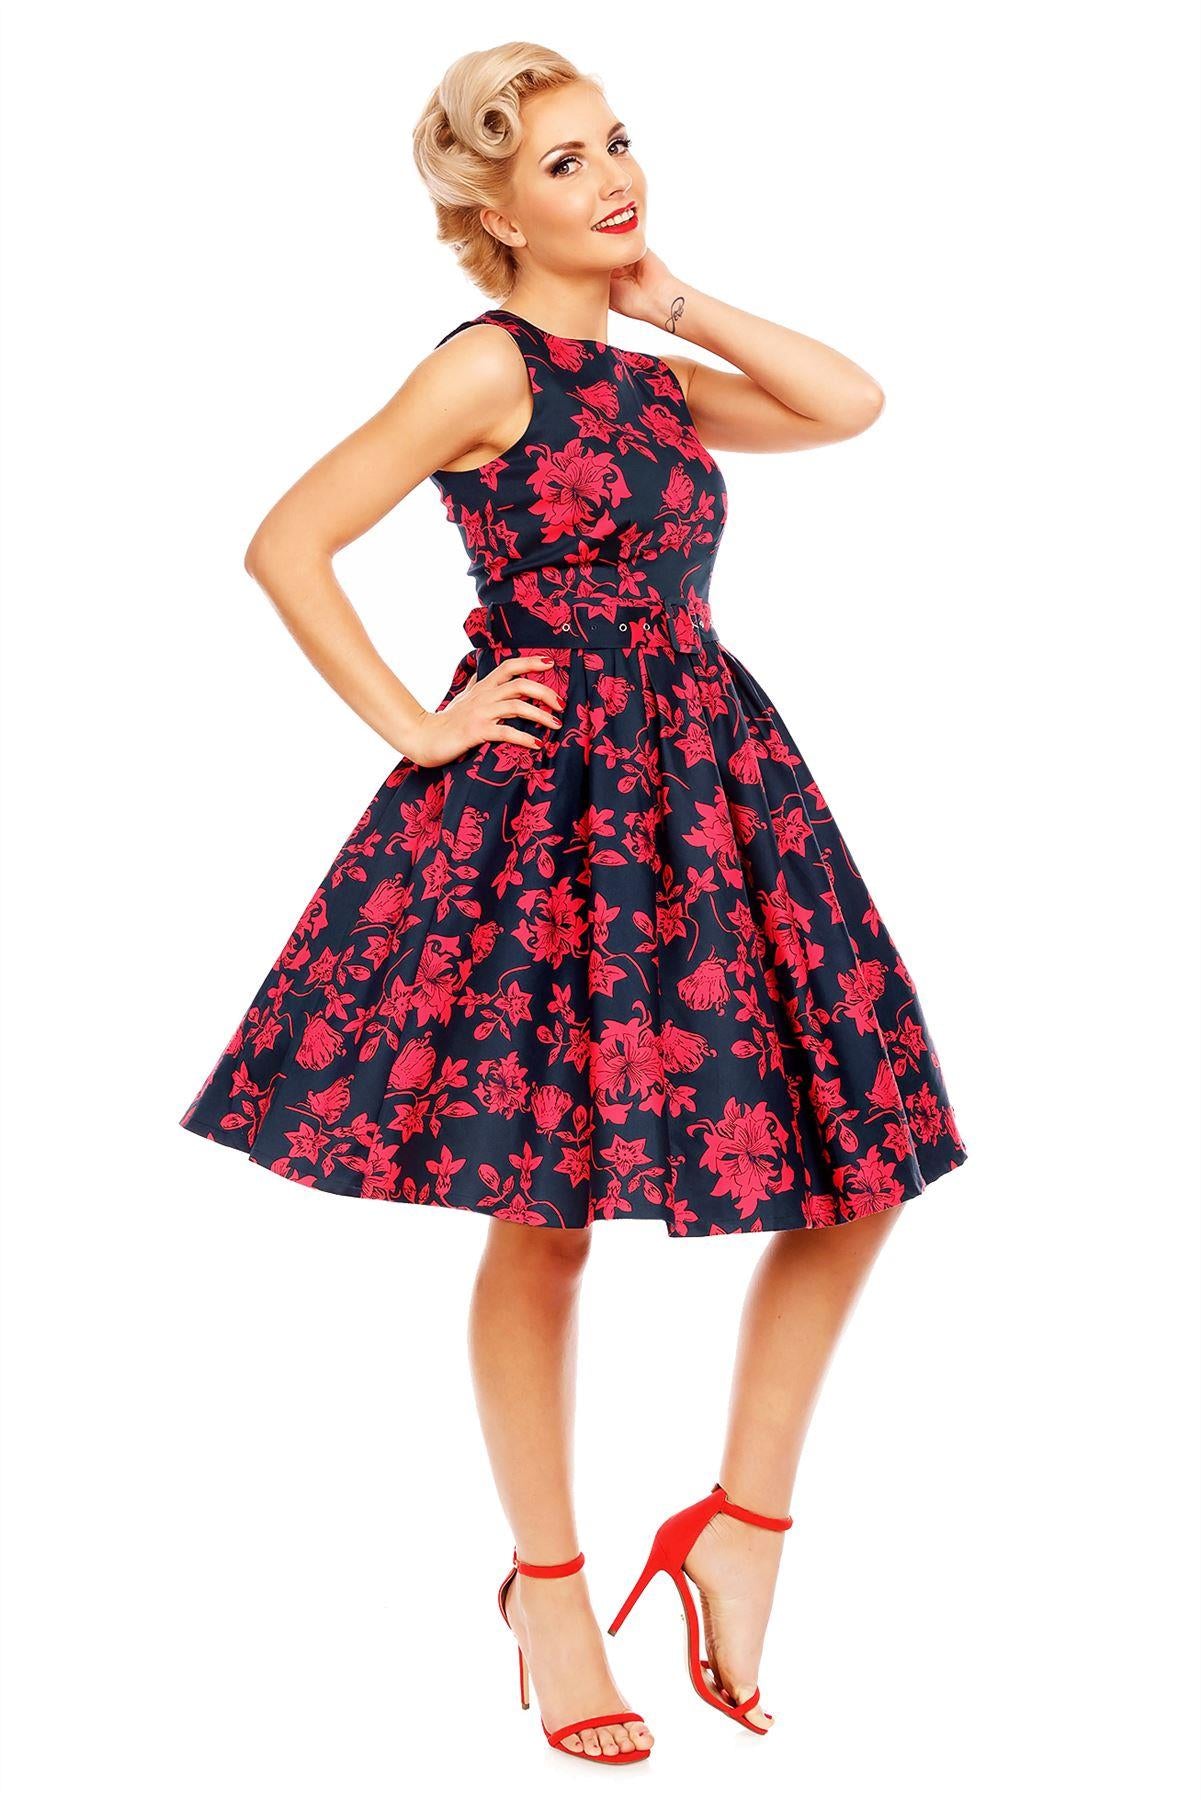 Model wearing Retro Swing Dress in Navy Blue/Red floral print, side view